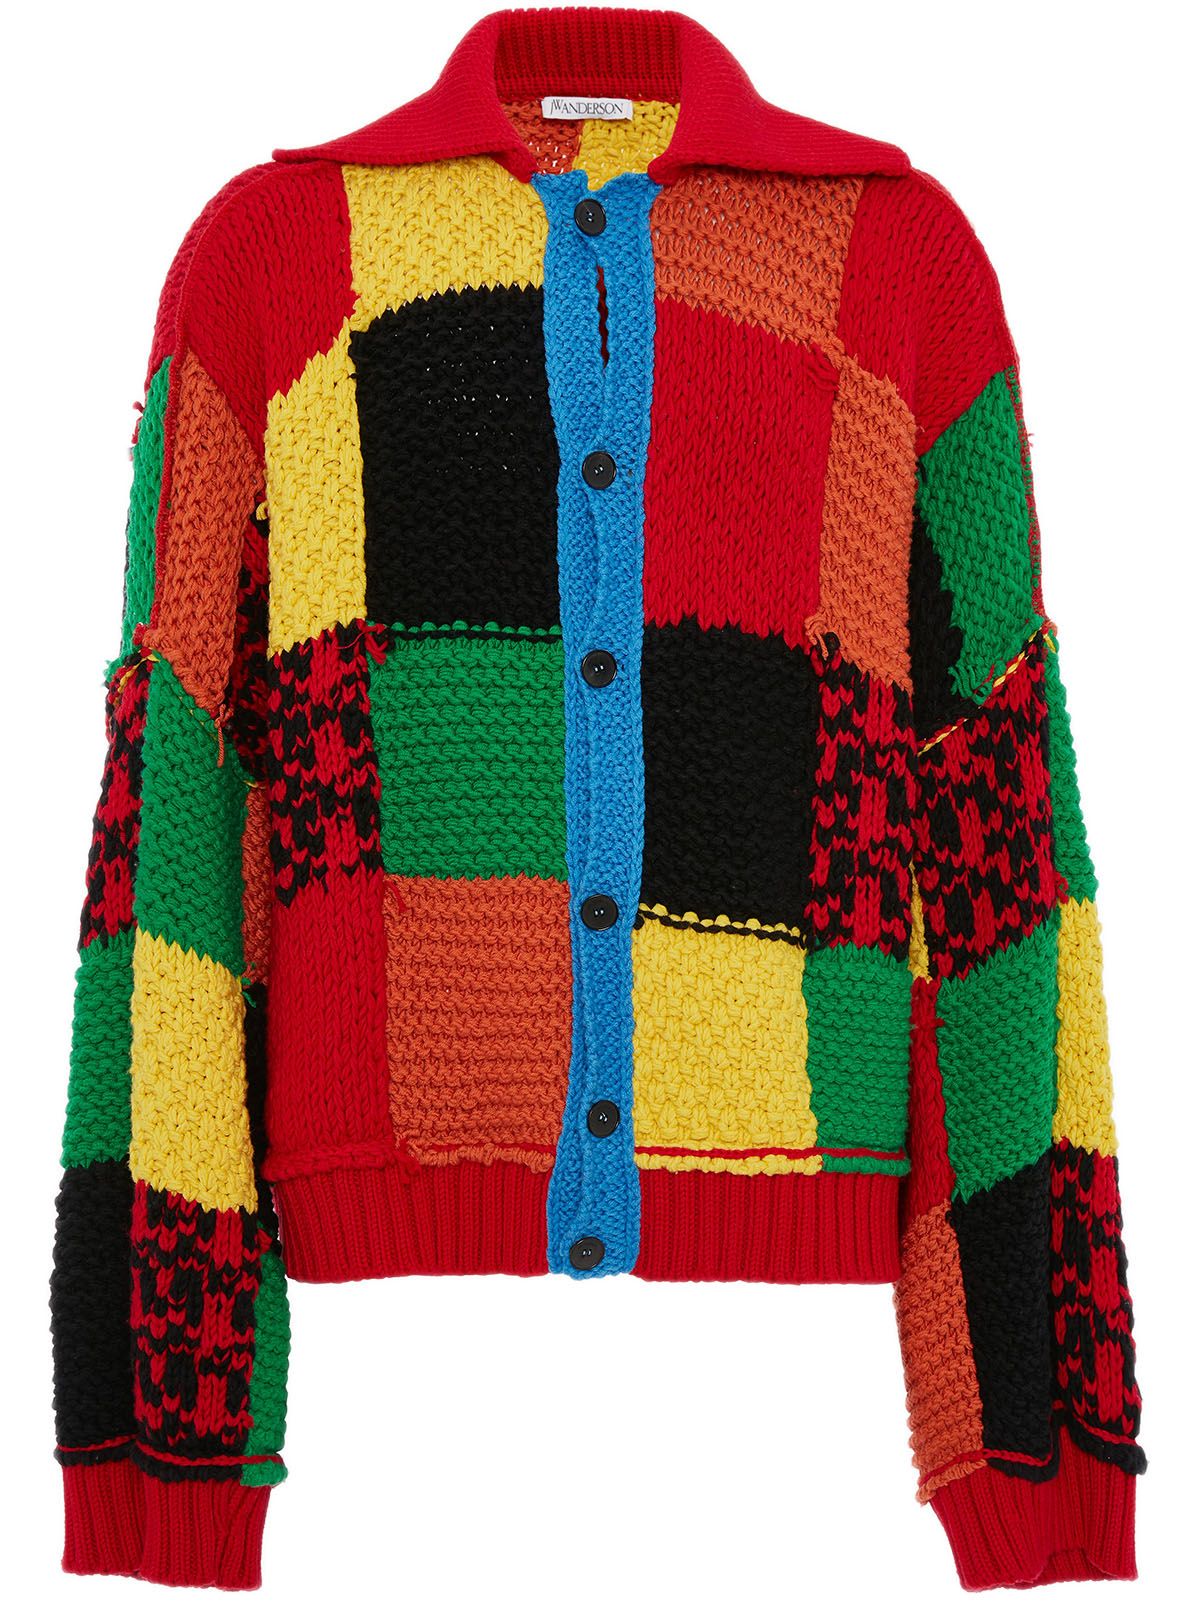 Harry Styles cardigan, designed by JW Anderson Courtesy V&A